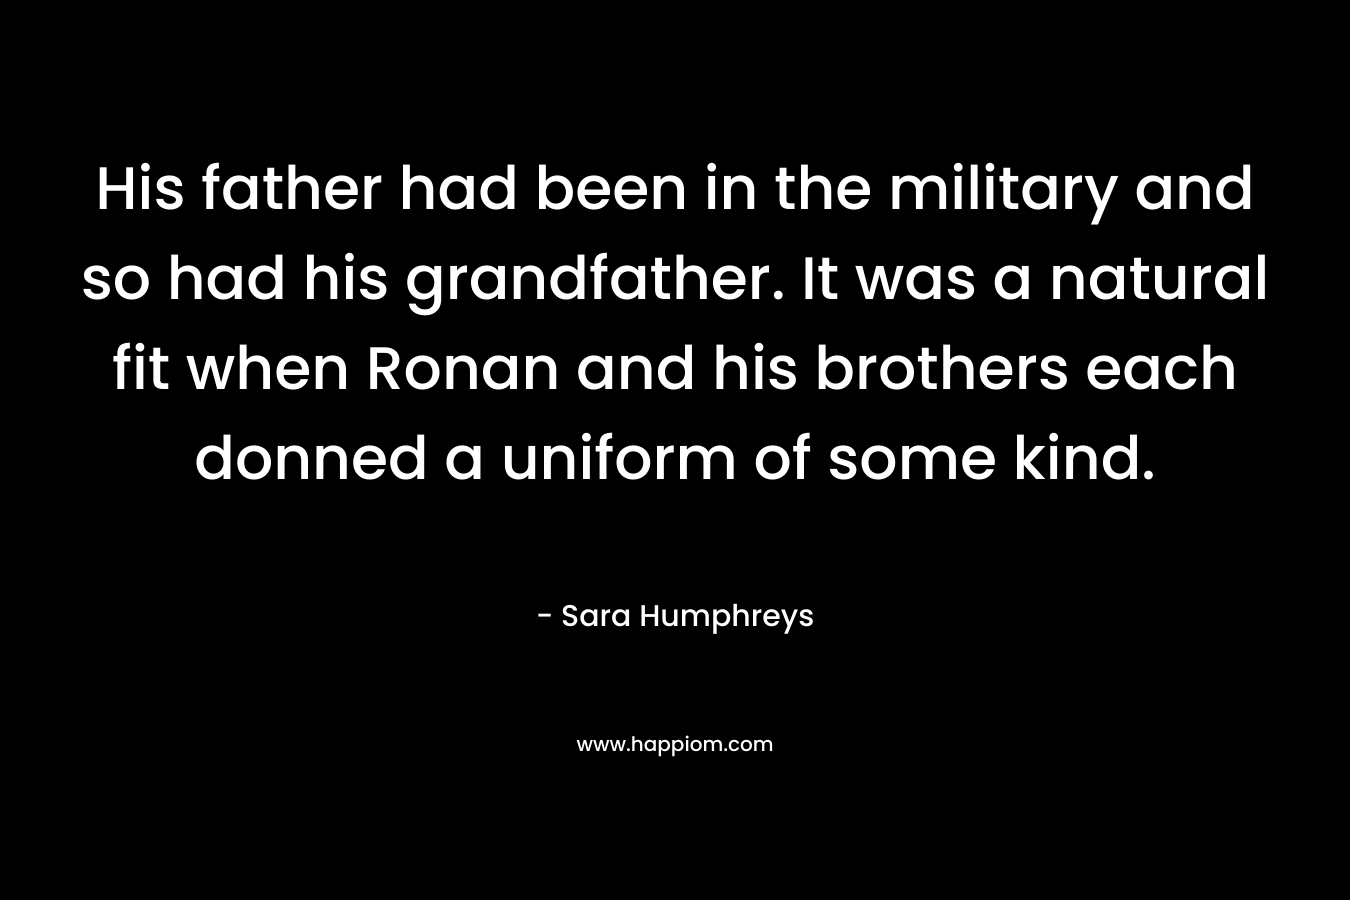 His father had been in the military and so had his grandfather. It was a natural fit when Ronan and his brothers each donned a uniform of some kind. – Sara Humphreys